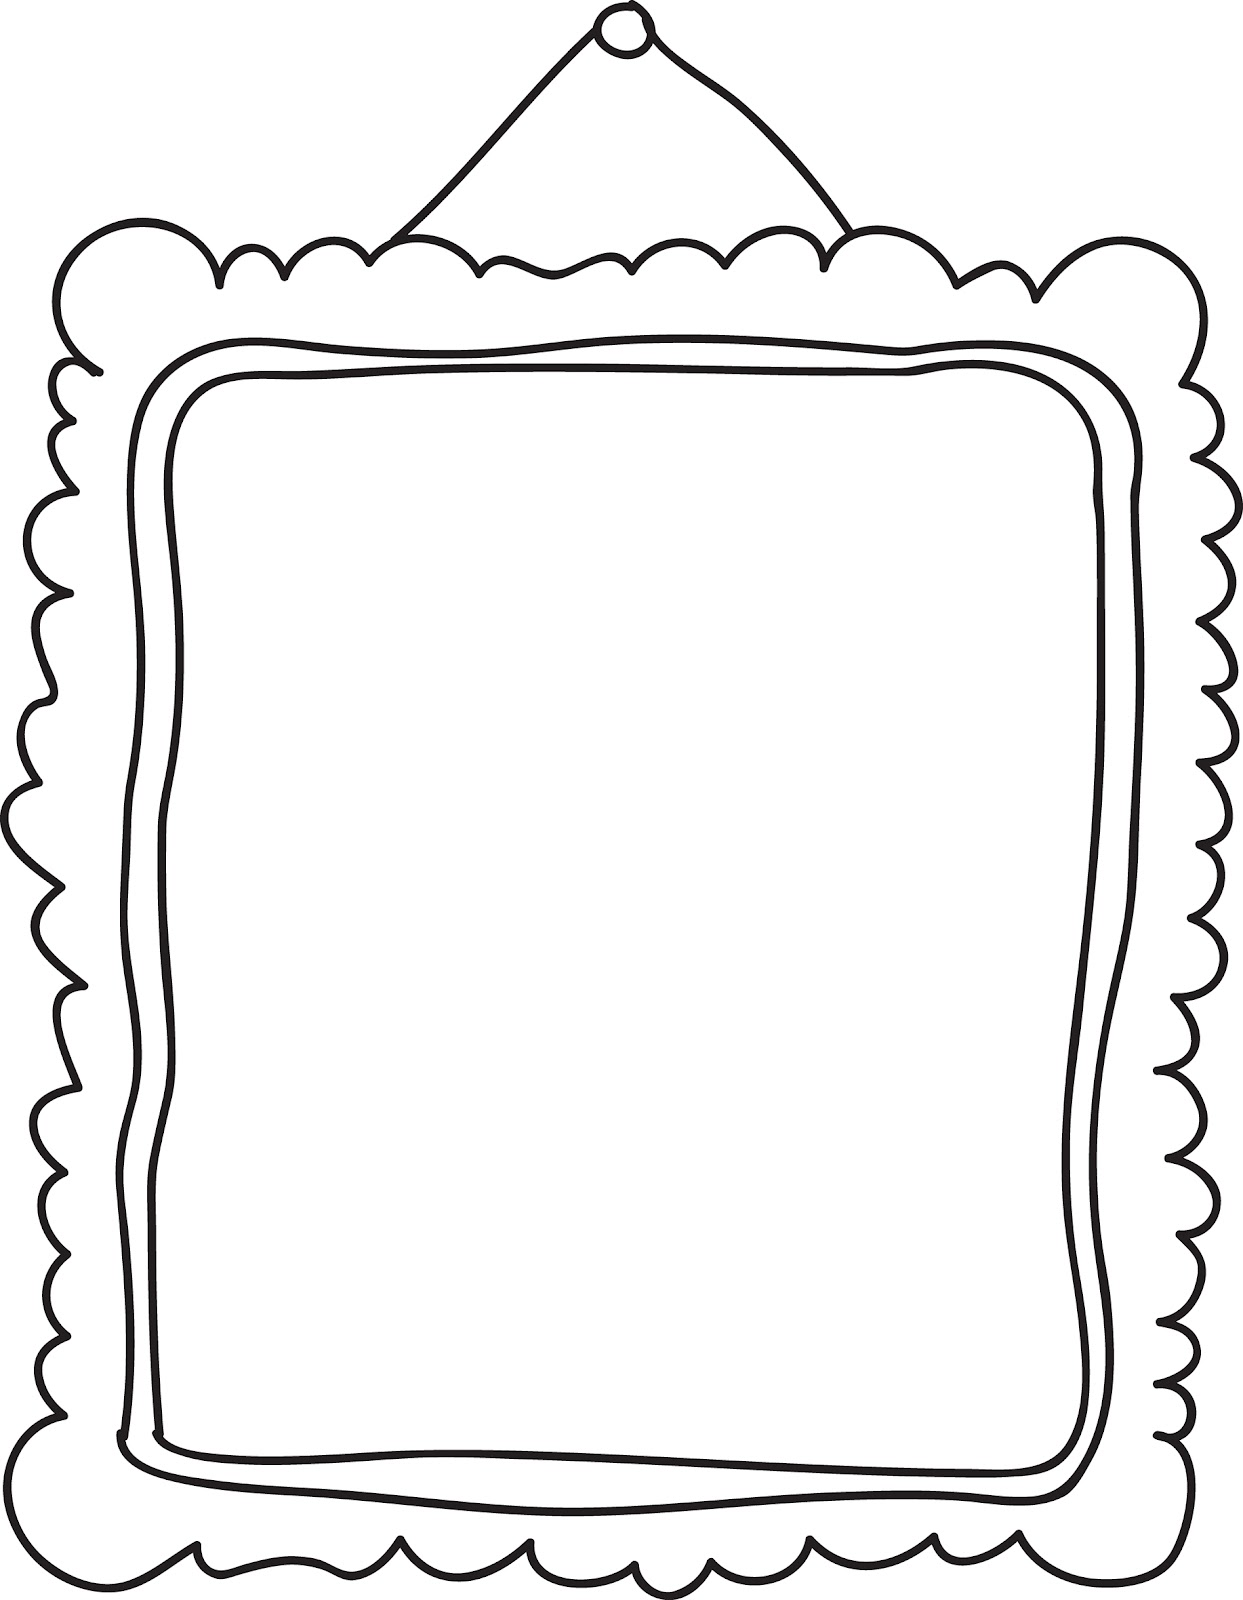 Frame clip art black and white free clipart images